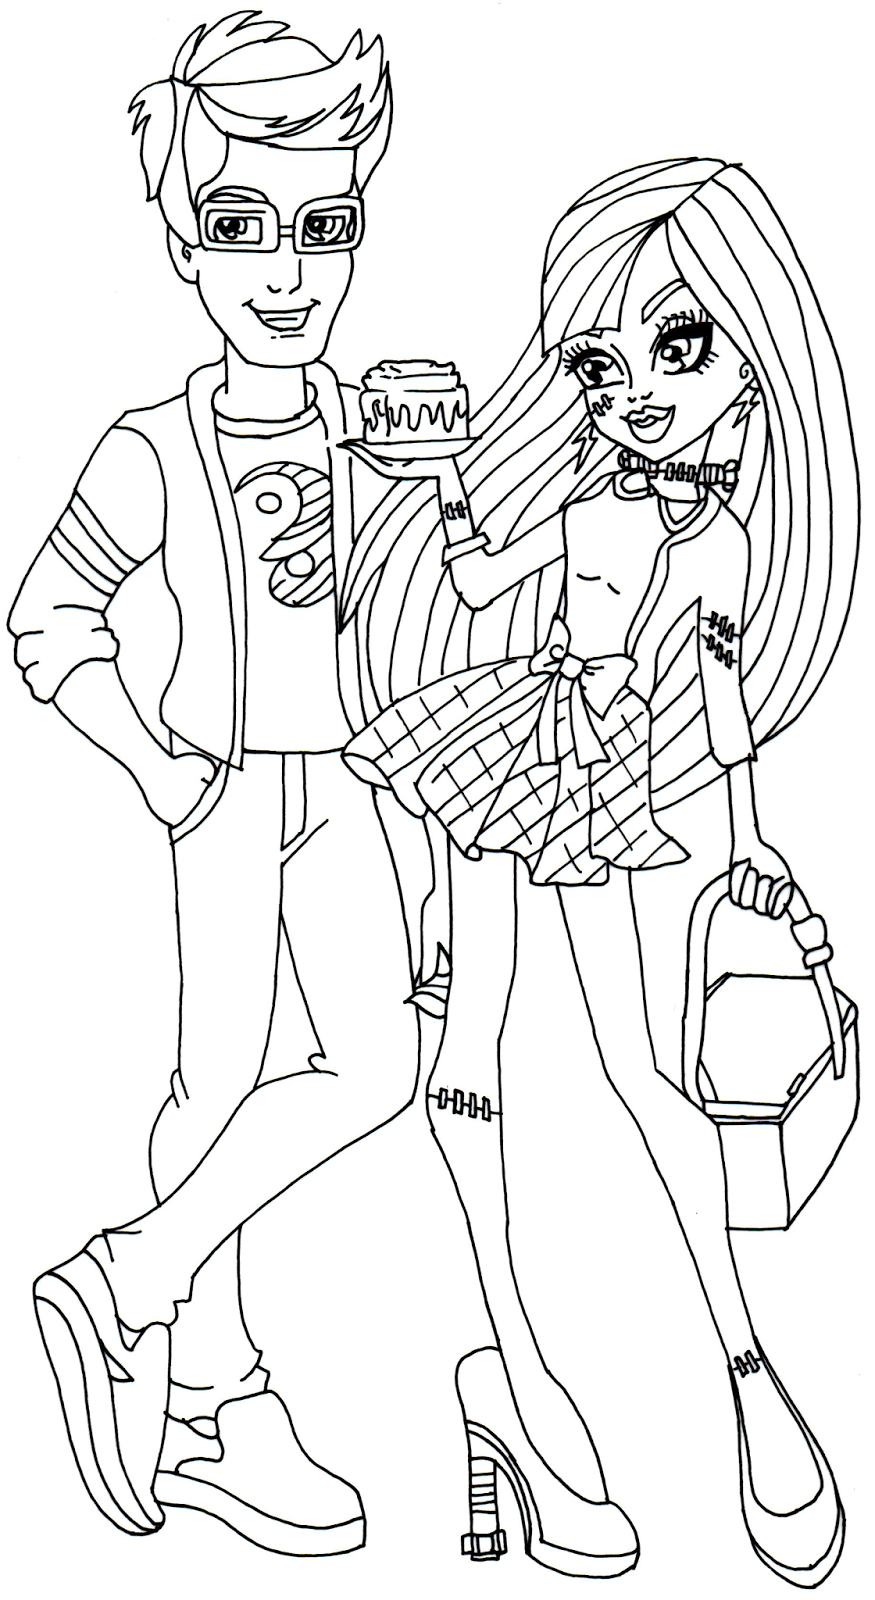 Free Printable Monster High Coloring Pages Picnic Casket for 2 Monster